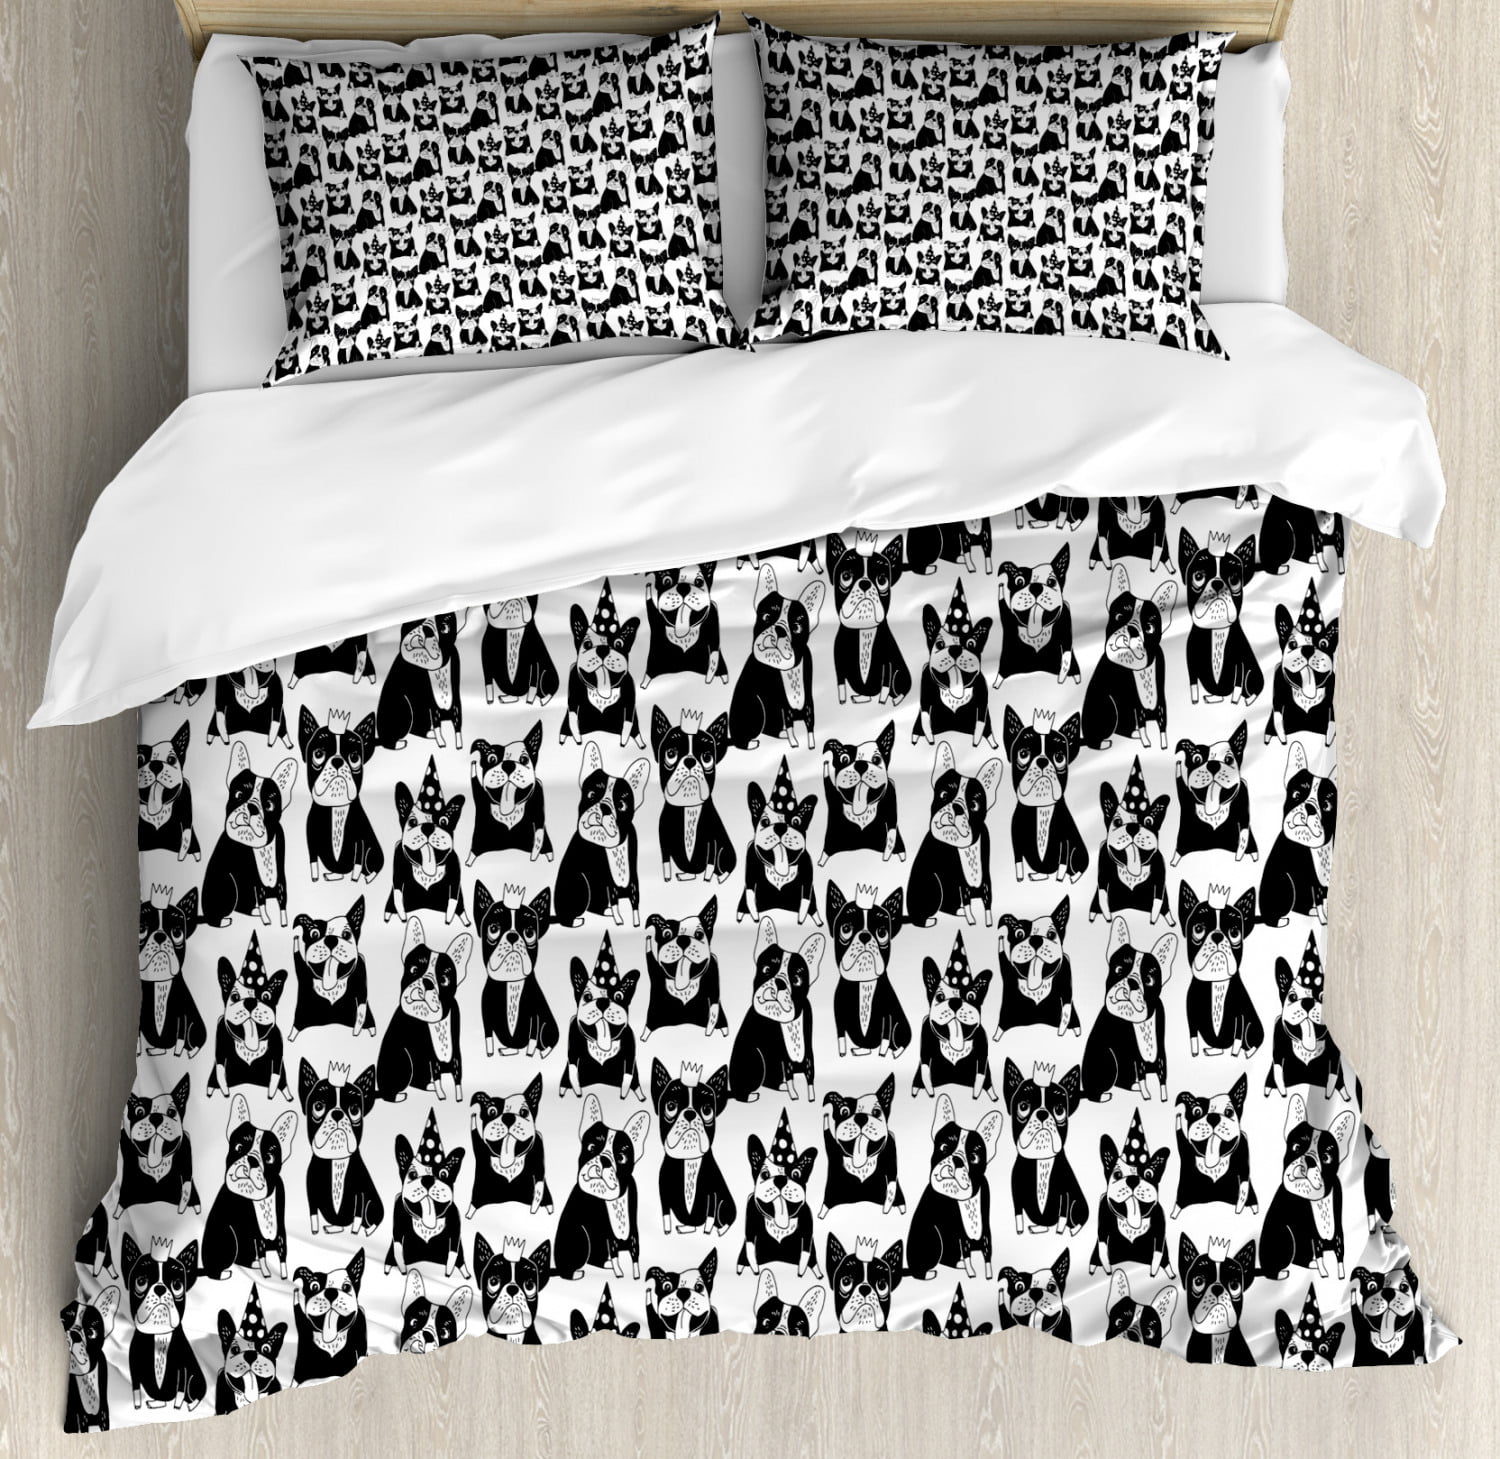 Pets Rock Single Bedding Set Dogs & cats looking cool !  